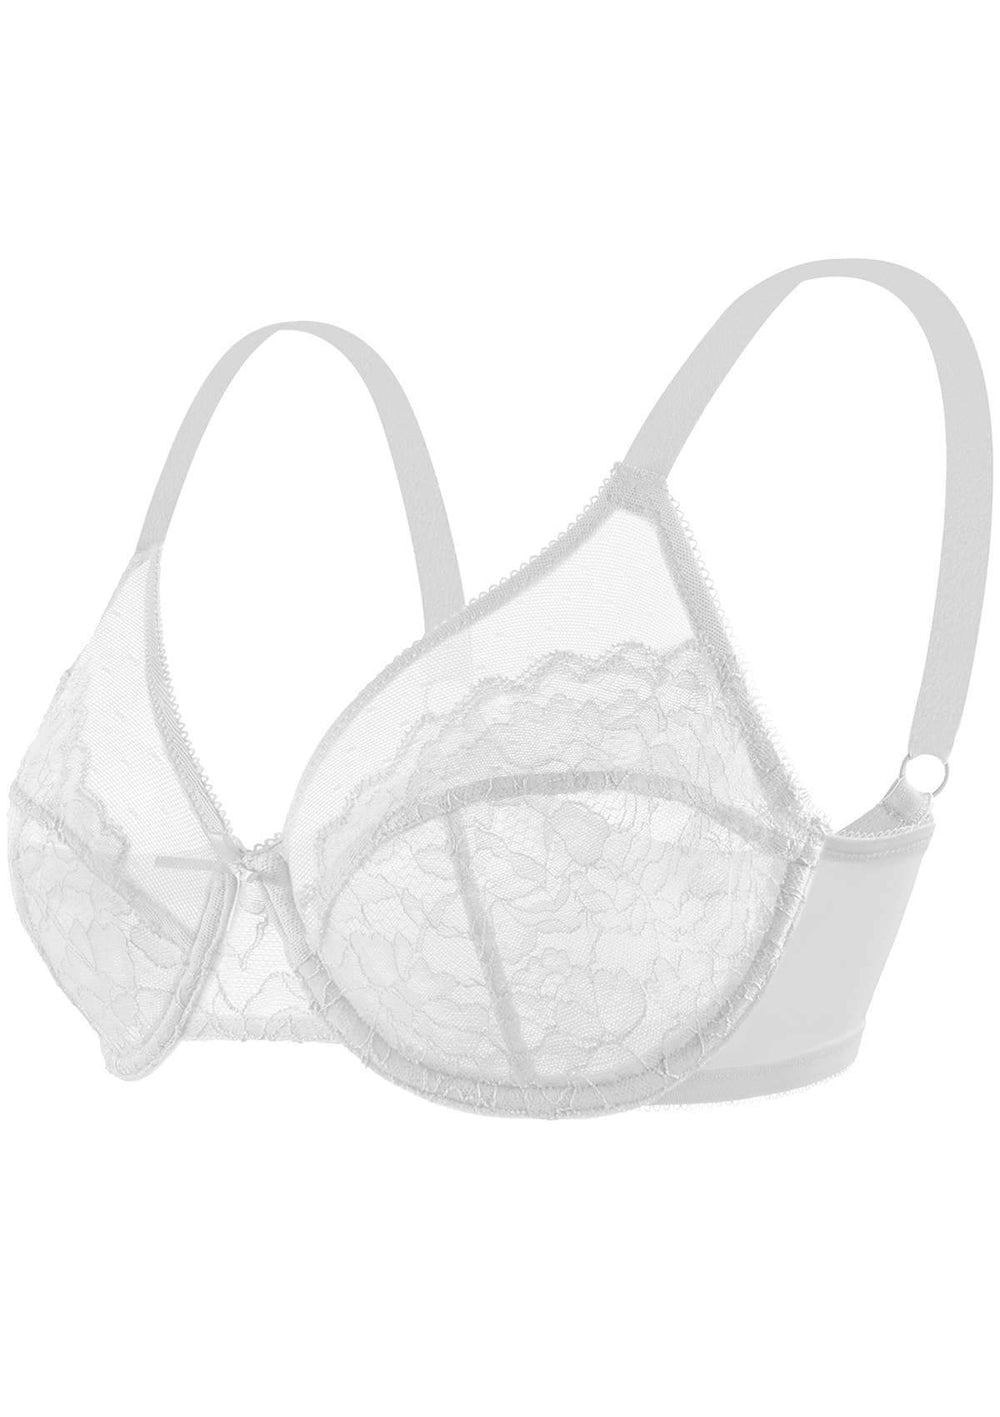 HSIA Enchante Full Support Lace Underwire Bra: Ideal for Big Breasts